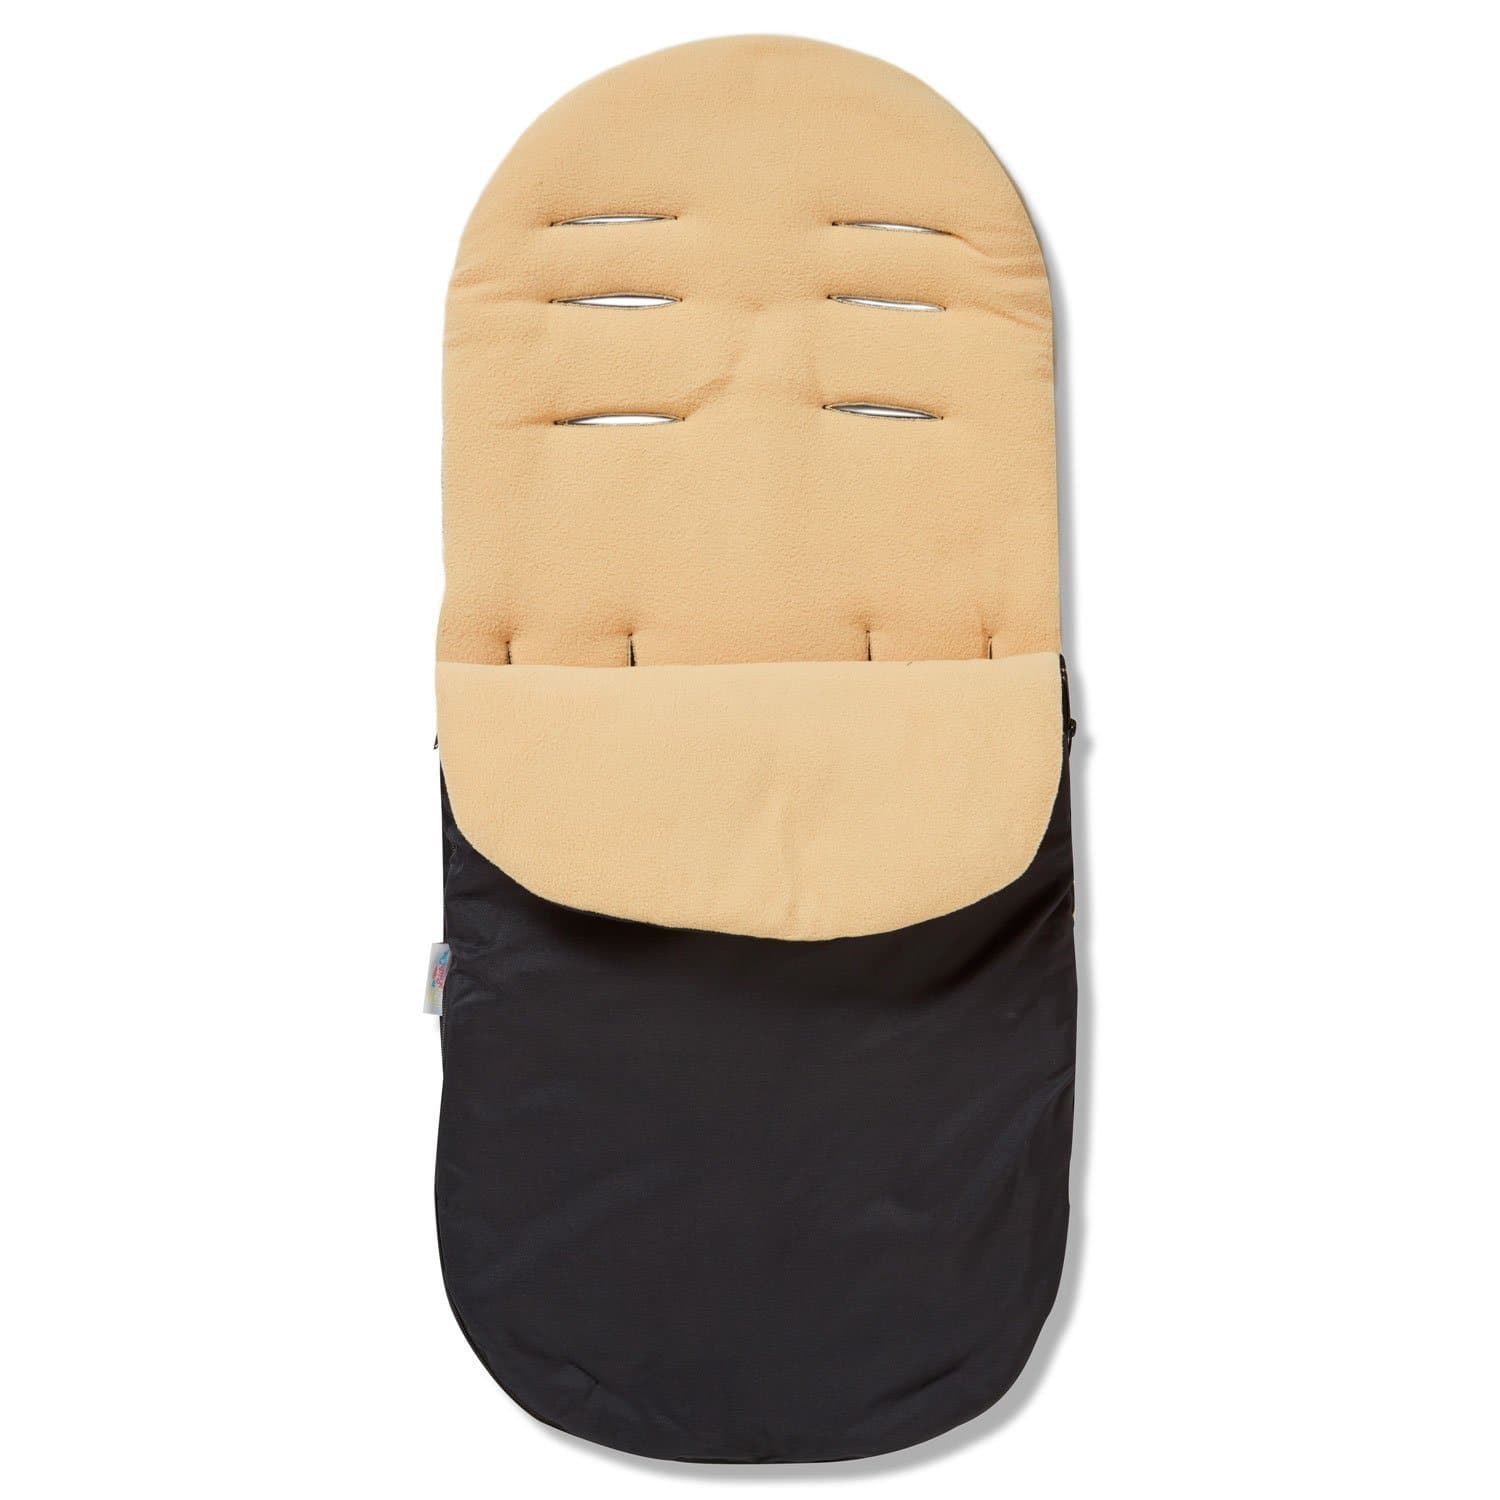 Footmuff / Cosy Toes Compatible with Teutonia - For Your Little One